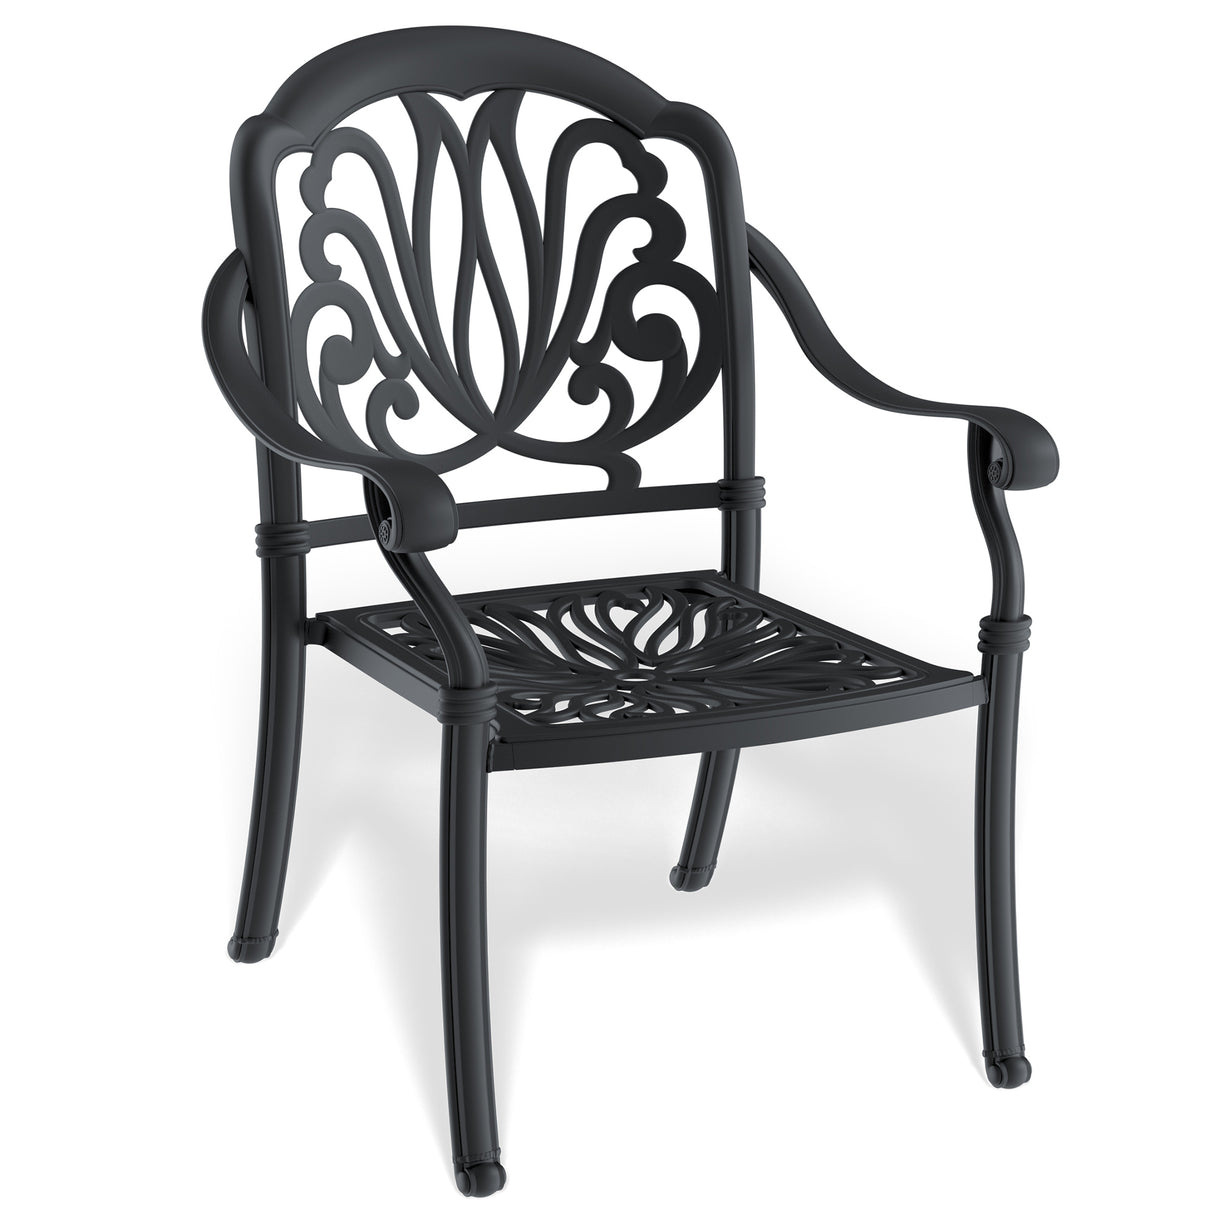 3-Piece Set Of Cast Aluminum Patio Furniture  With Black Frame and  Seat Cushions In Random Colors